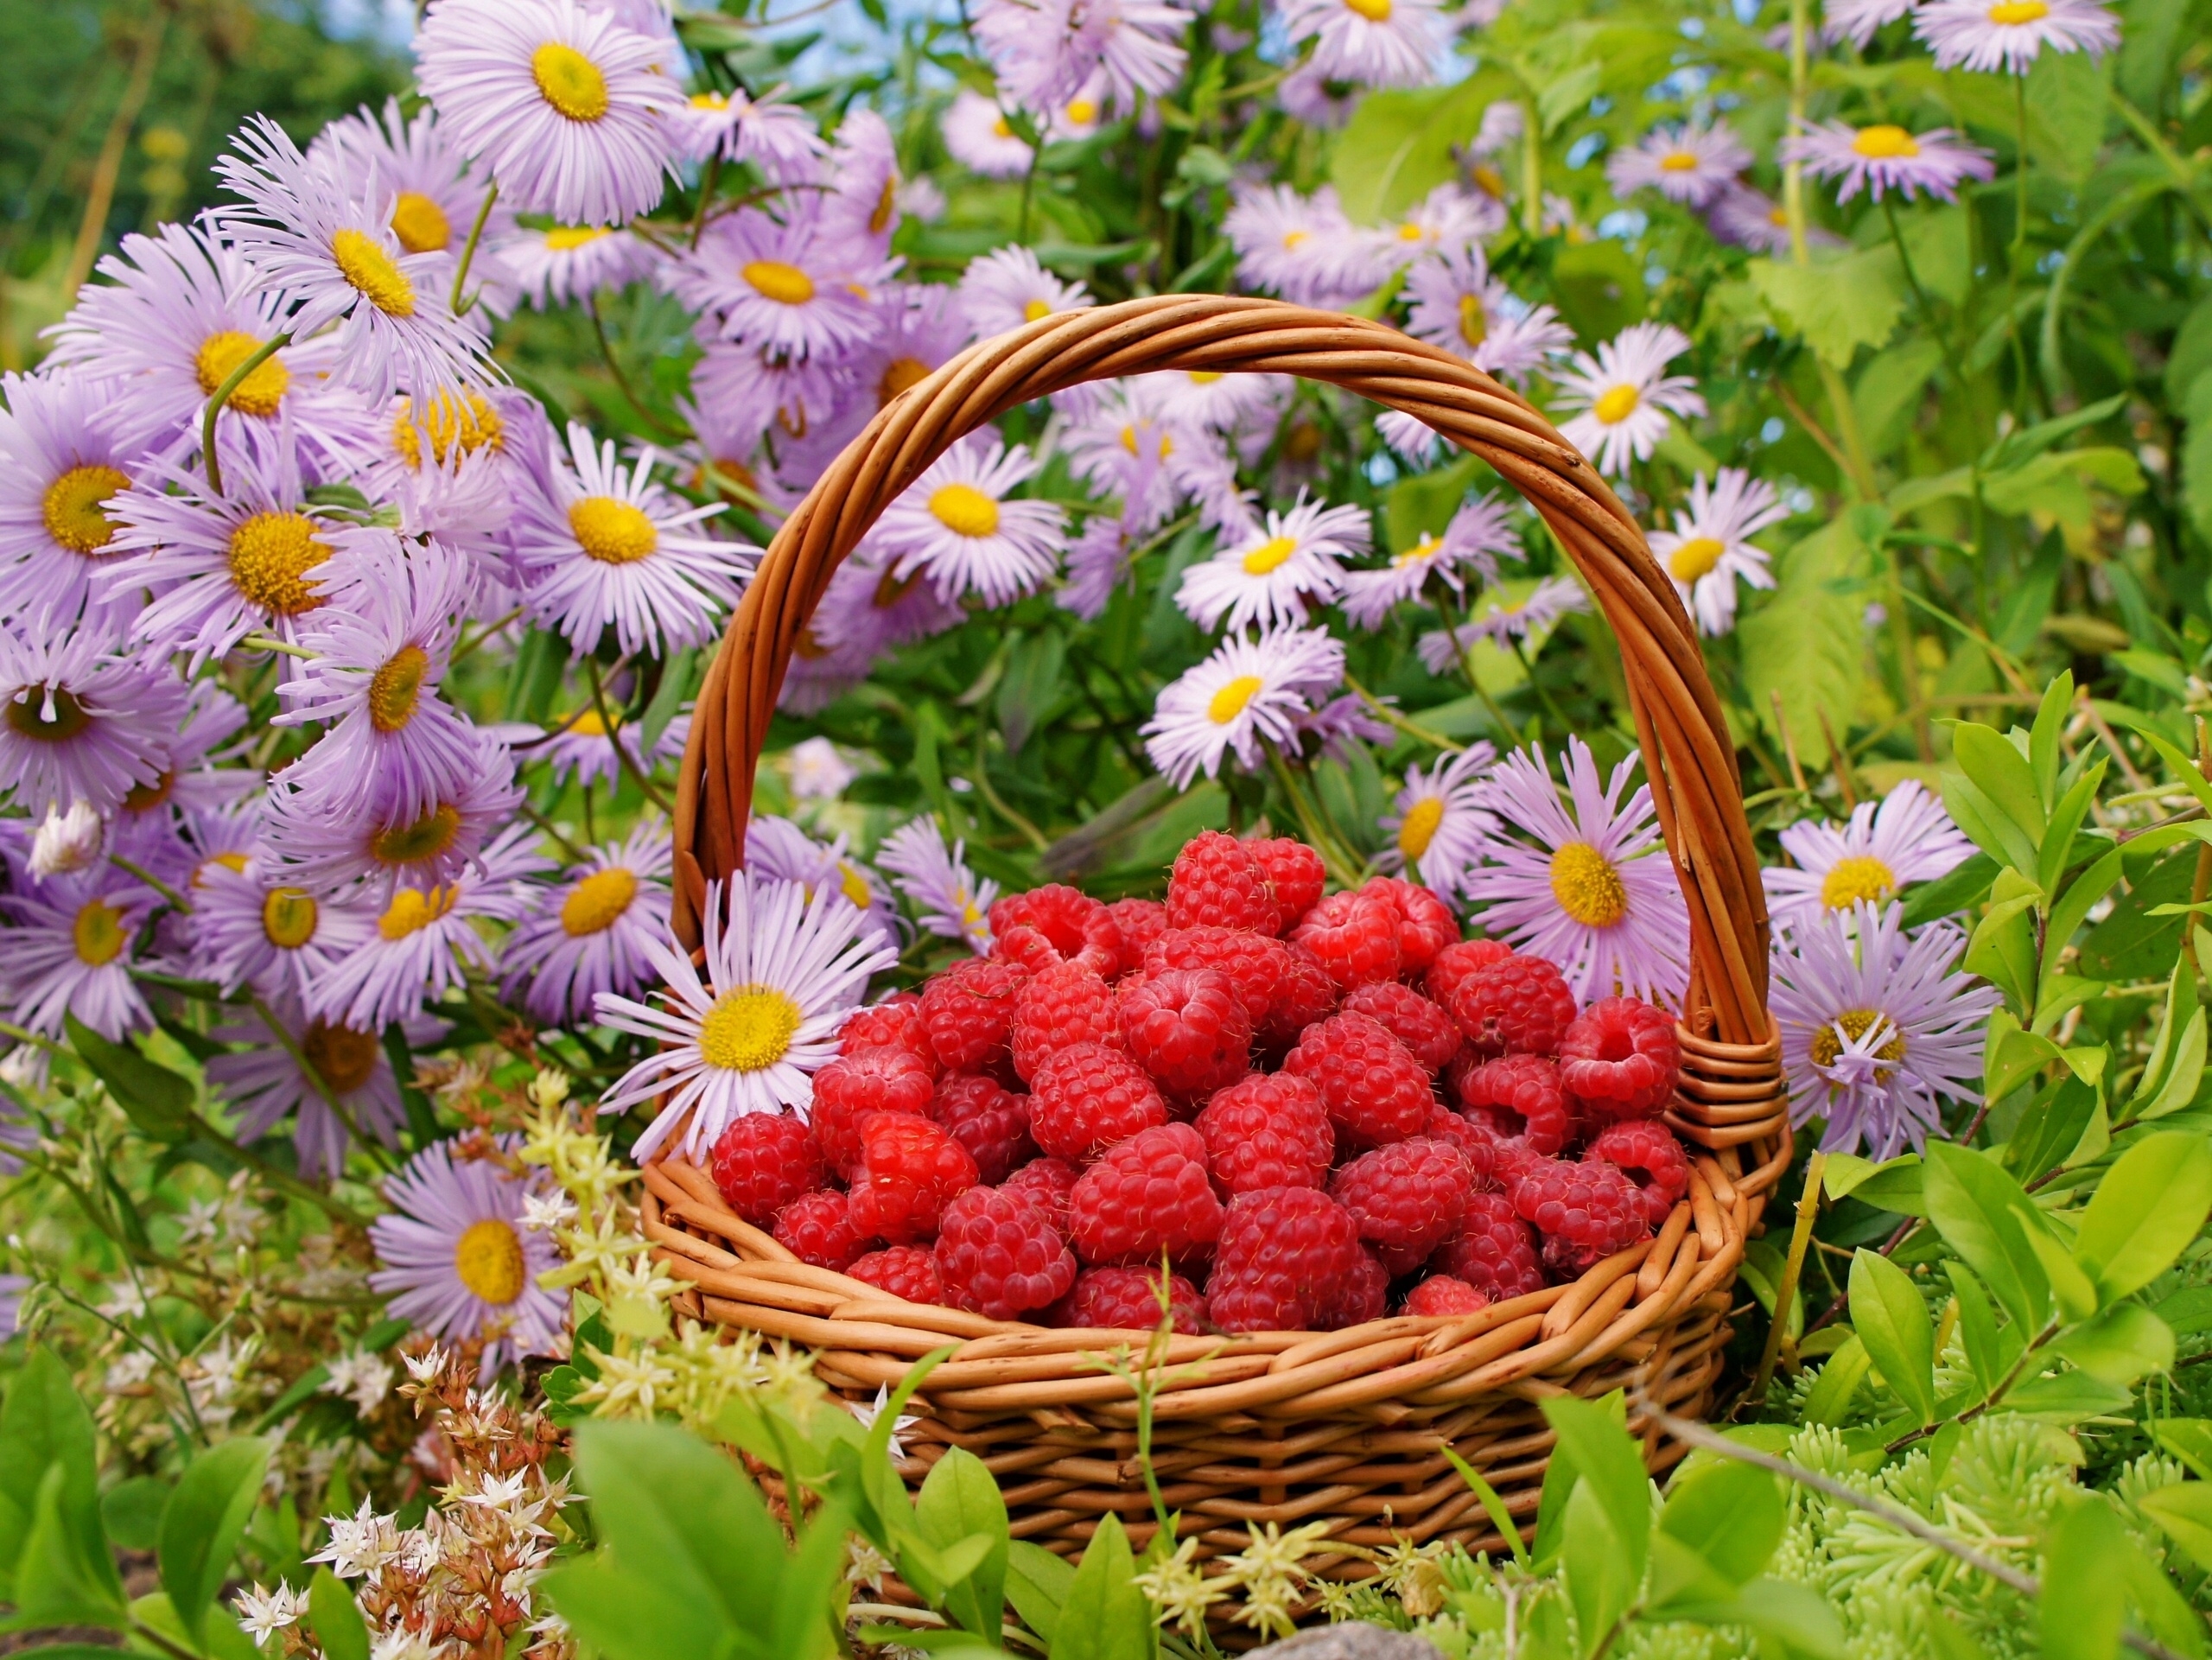 138344 download wallpaper flowers, food, raspberry, berries, basket screensavers and pictures for free